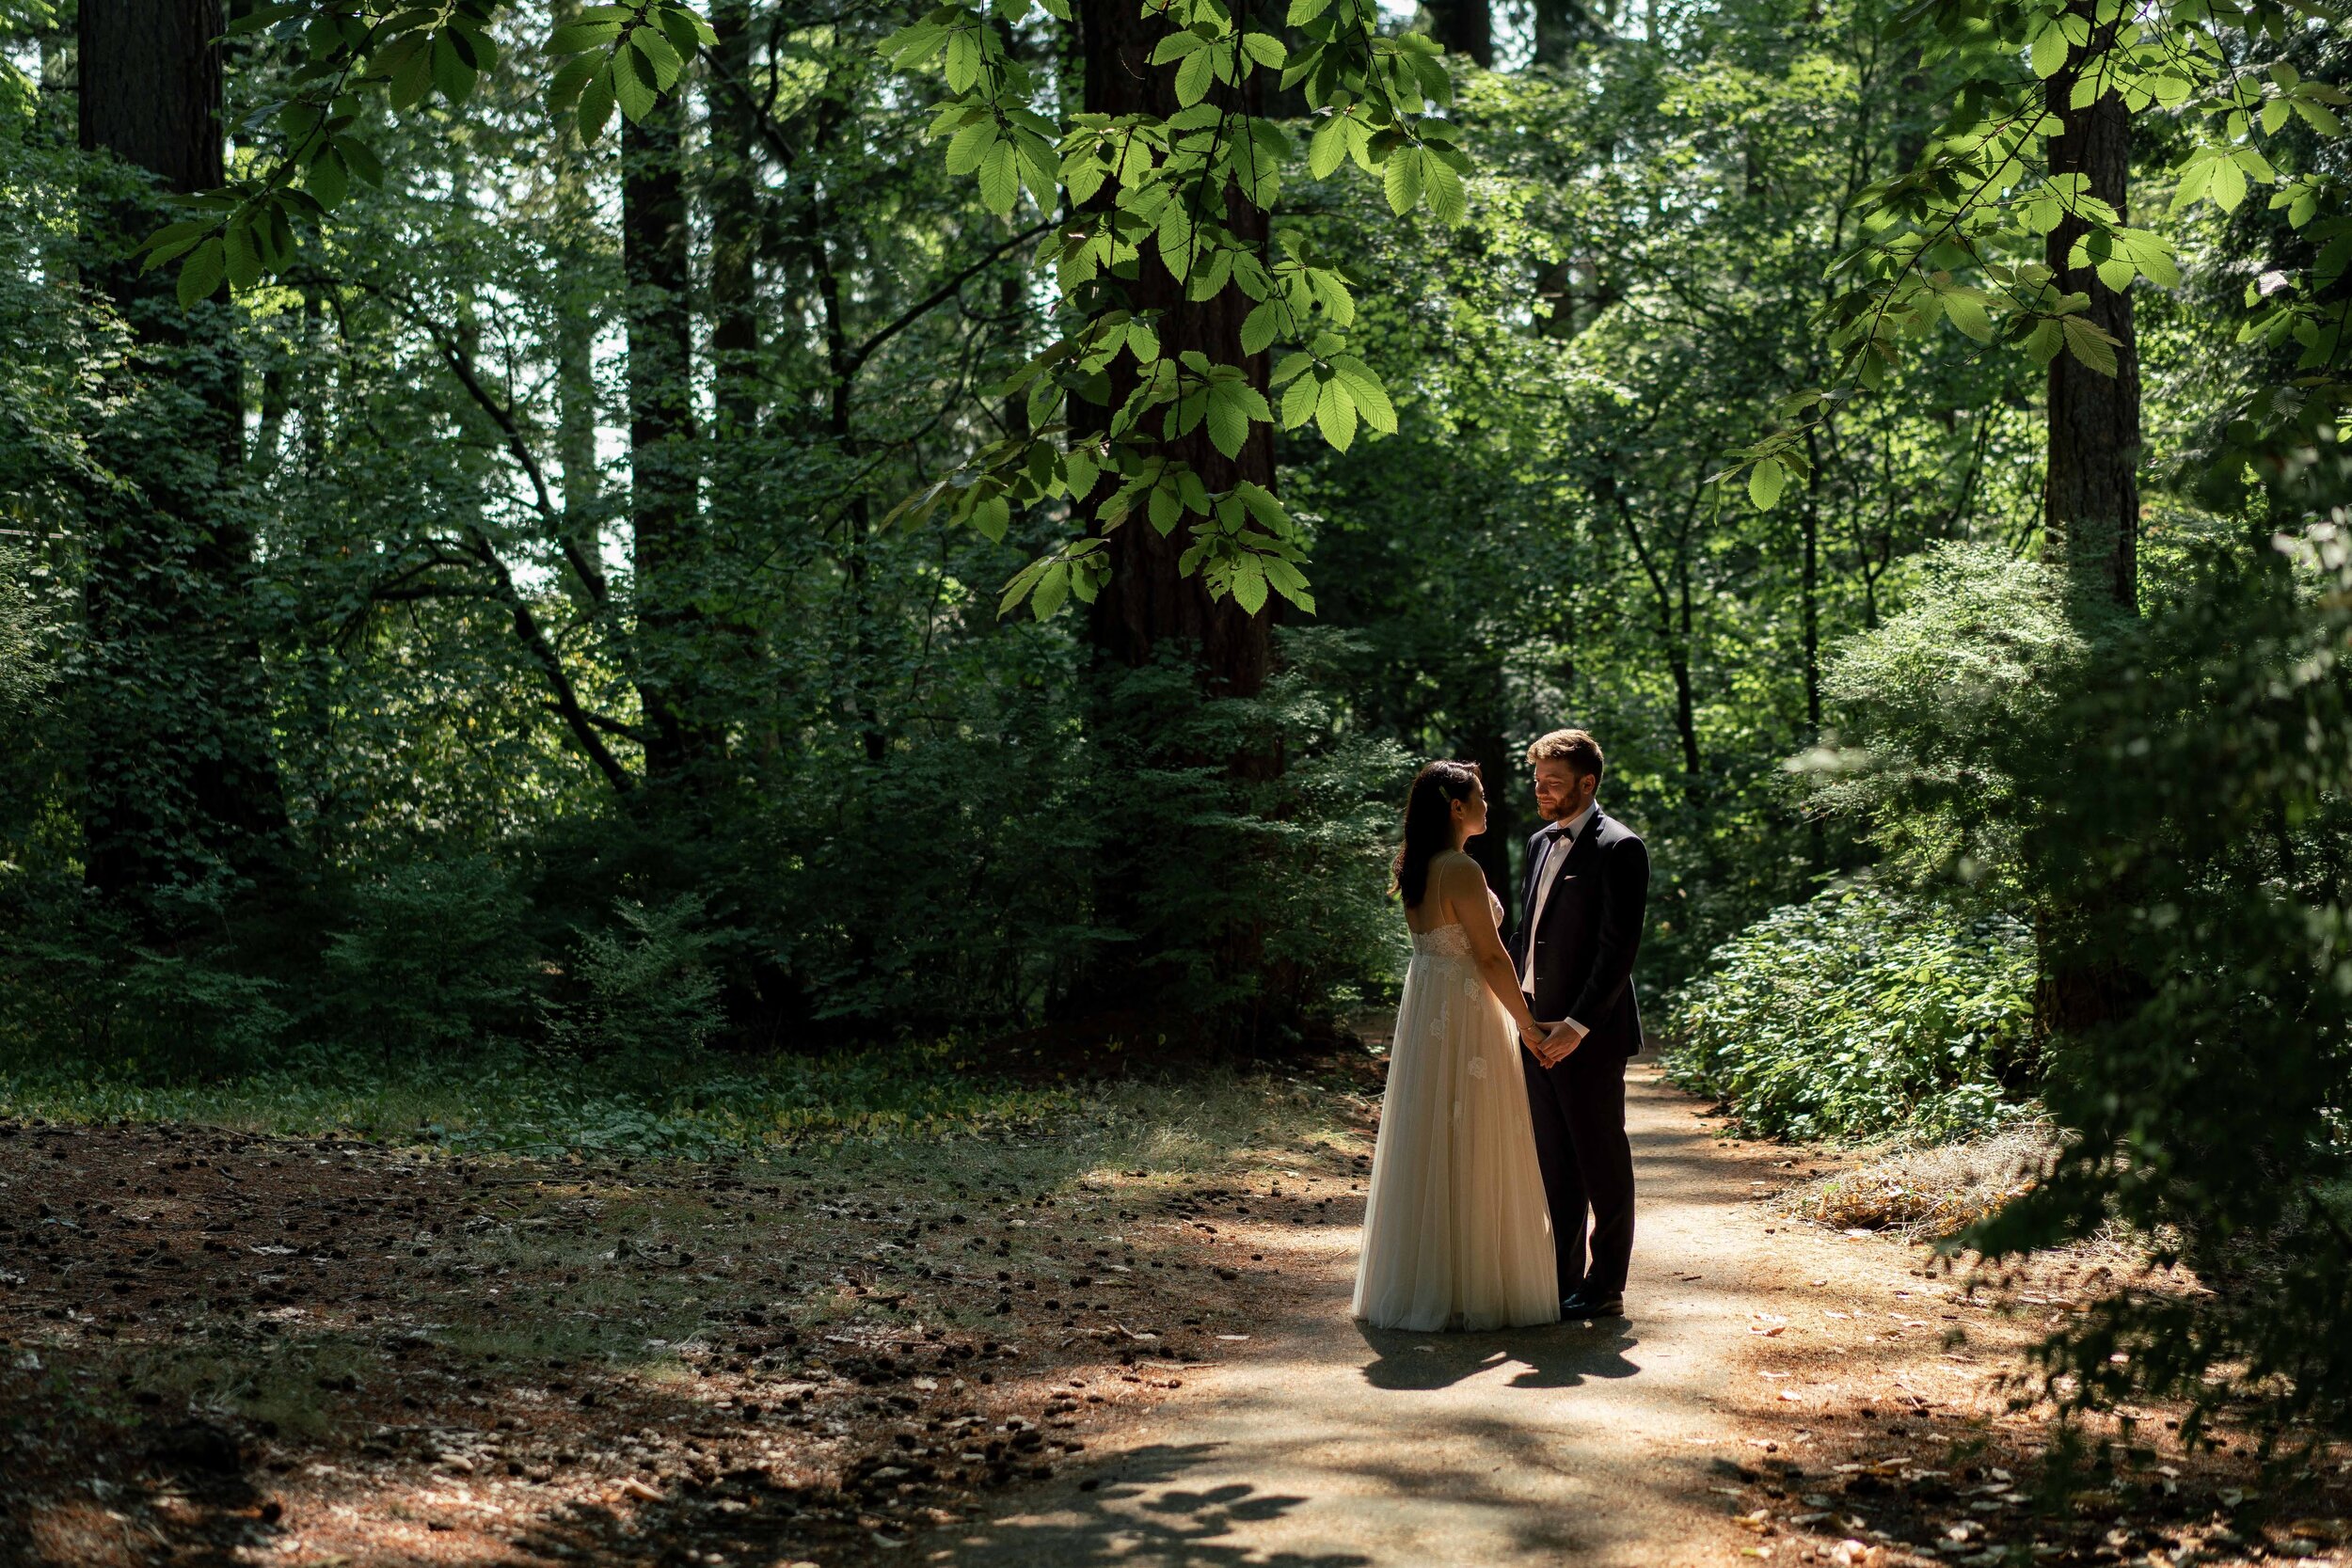 Intimate wedding day moment between the Bride and Groom. Private moment in a forested setting | Keepsake Events